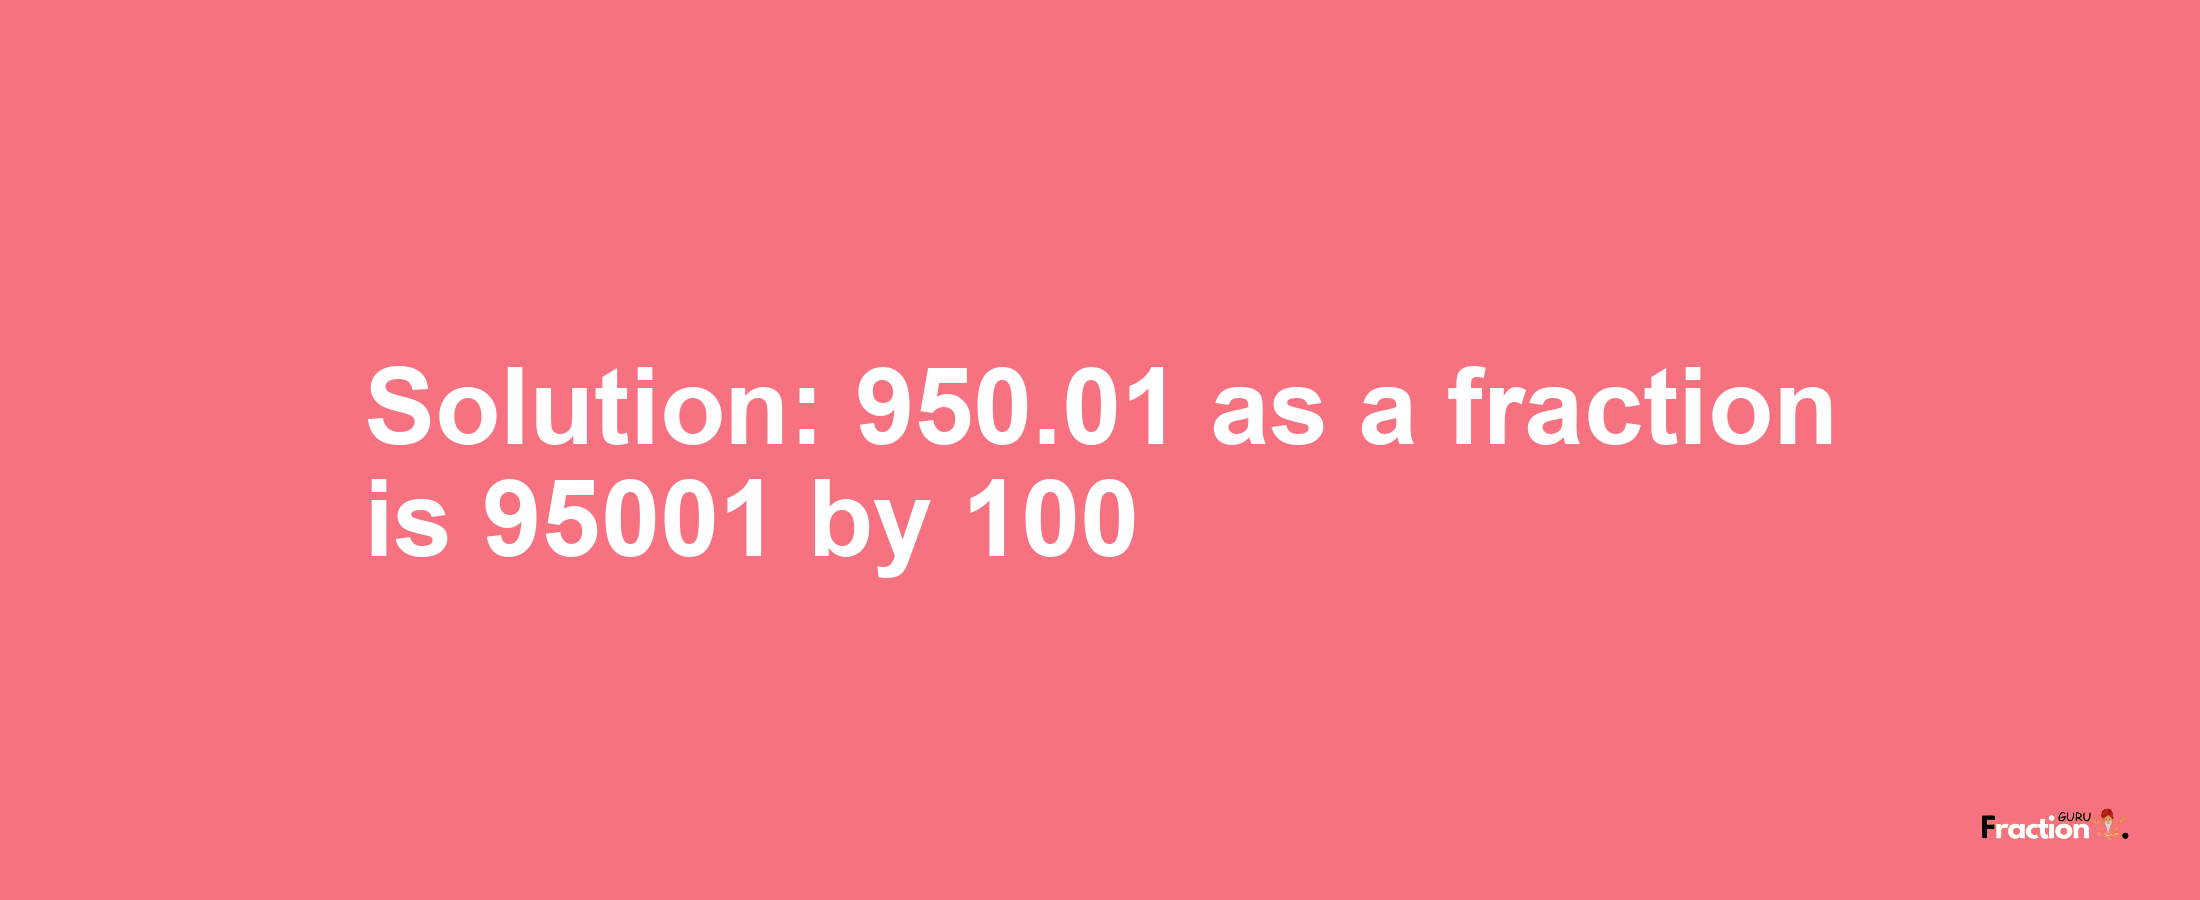 Solution:950.01 as a fraction is 95001/100